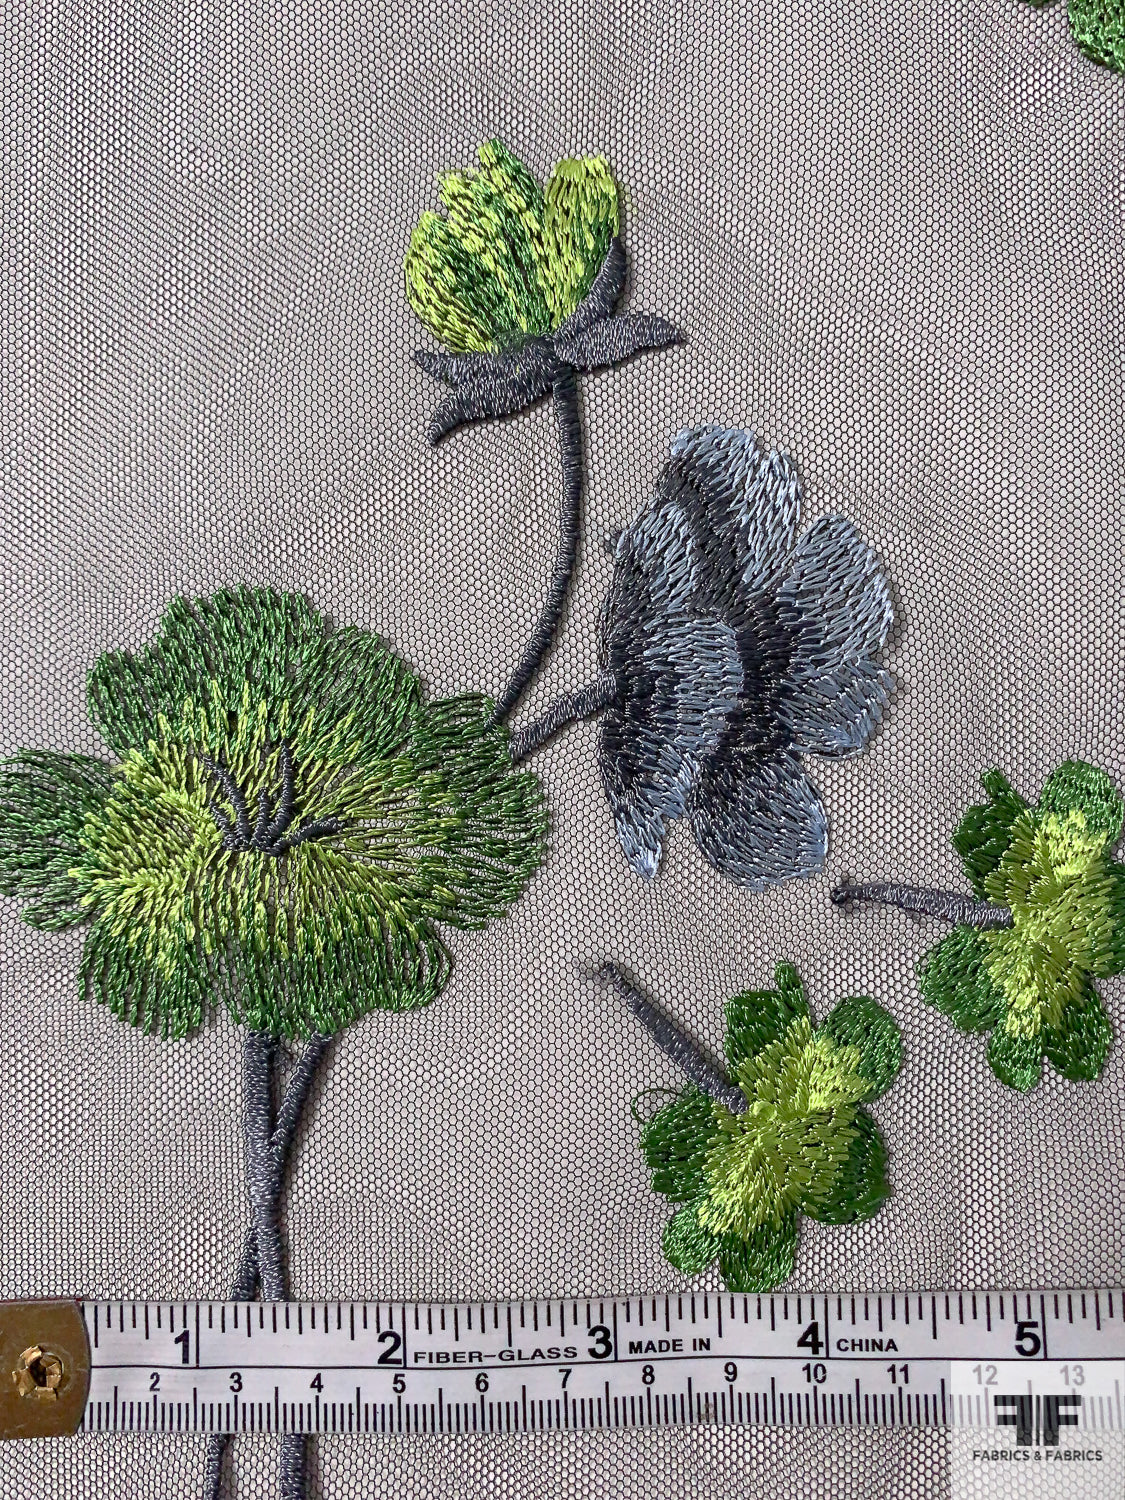 Floral Embroidered Fine Netting - Greens / Icey Sky Blue / Steel Grey / Black